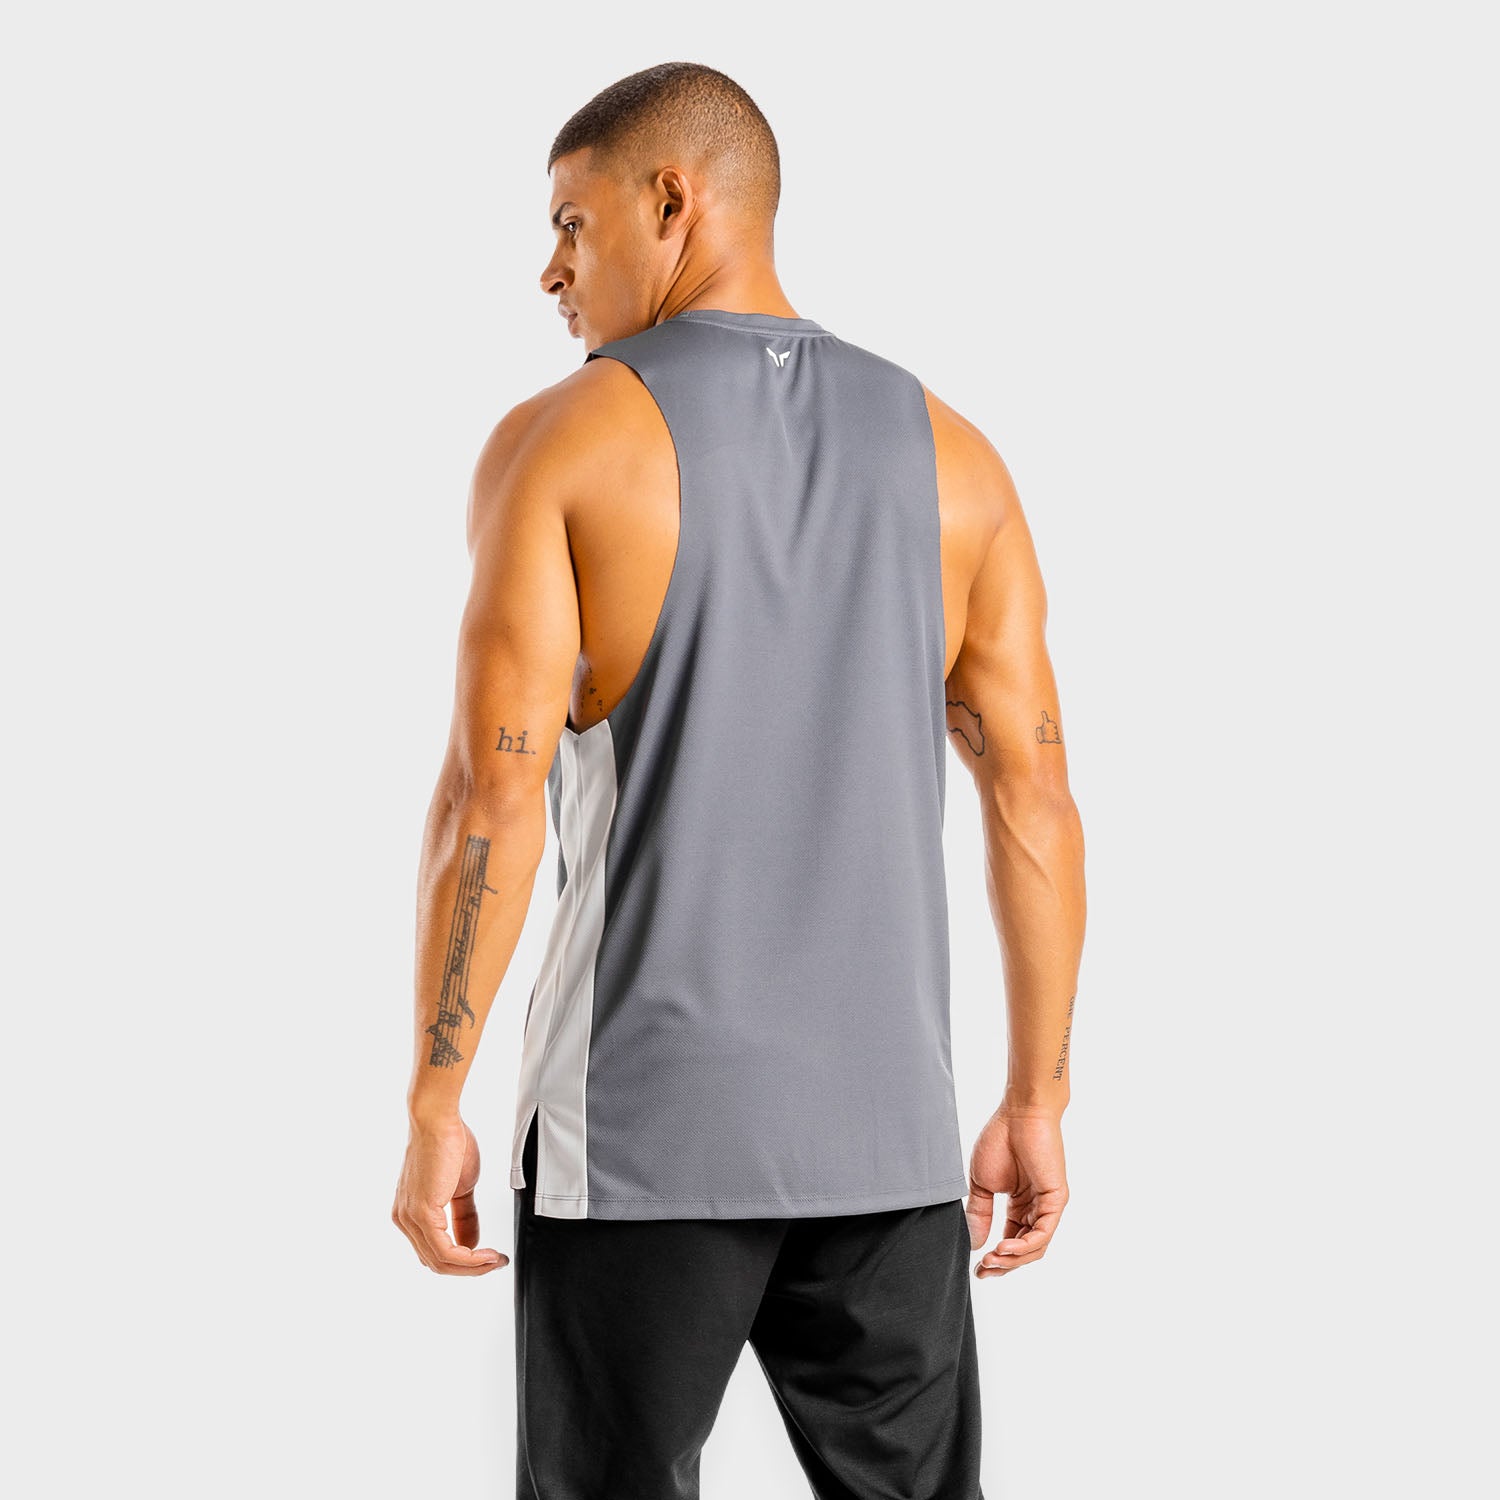 squatwolf-workout-tank-tops-for-men-flux-basketball-tank-charcoal-gym-wear